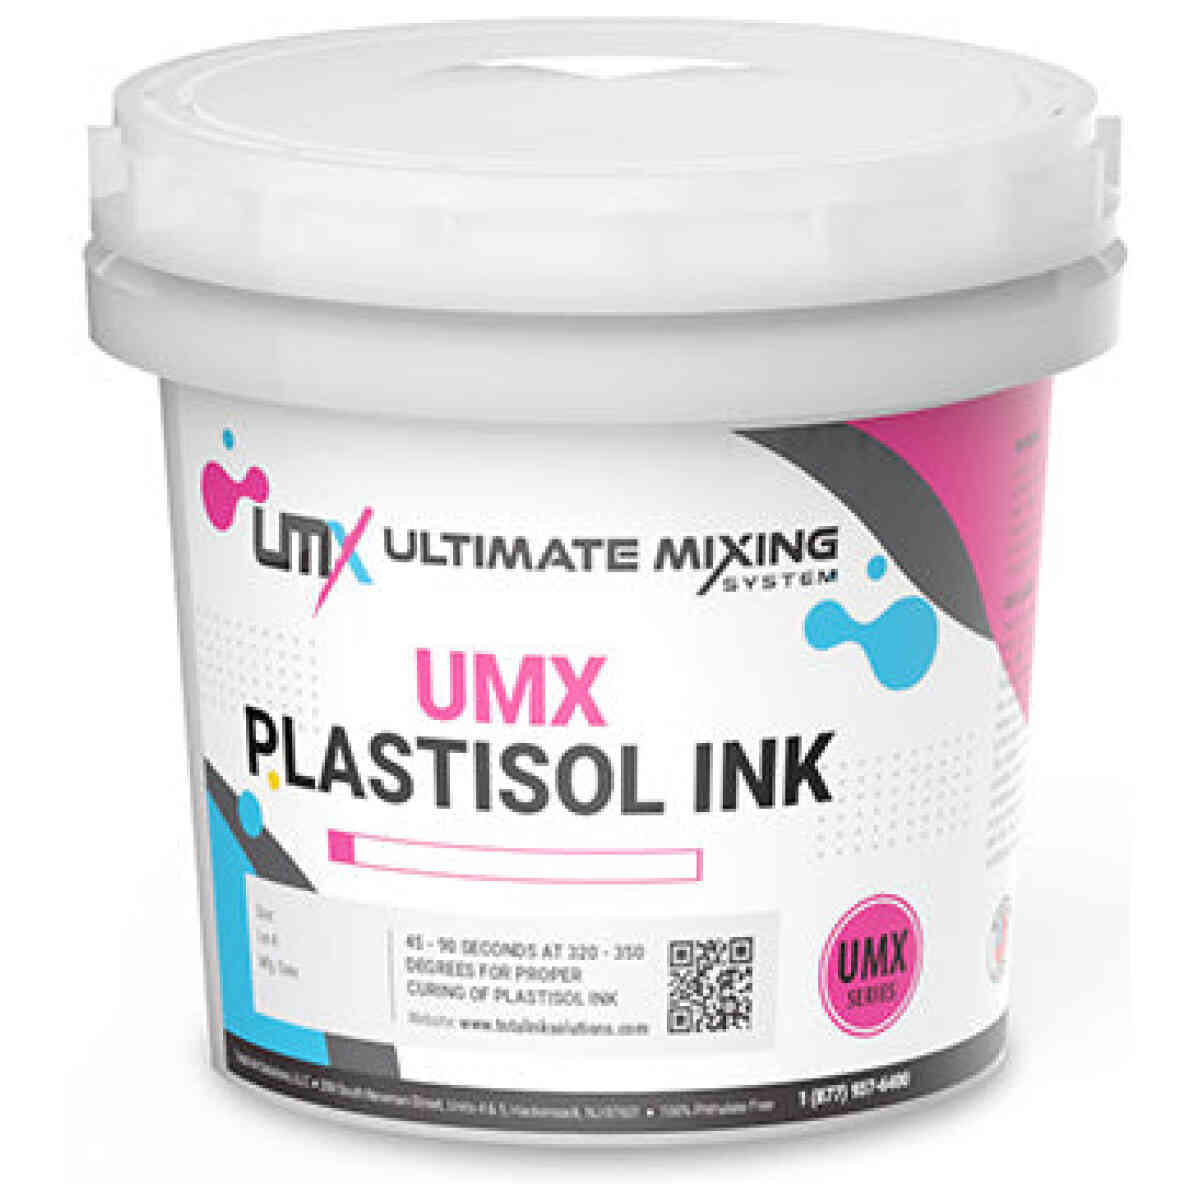 Pantone® Mixing System (Umx) - Pint TOTAL INK SOLUTIONS®